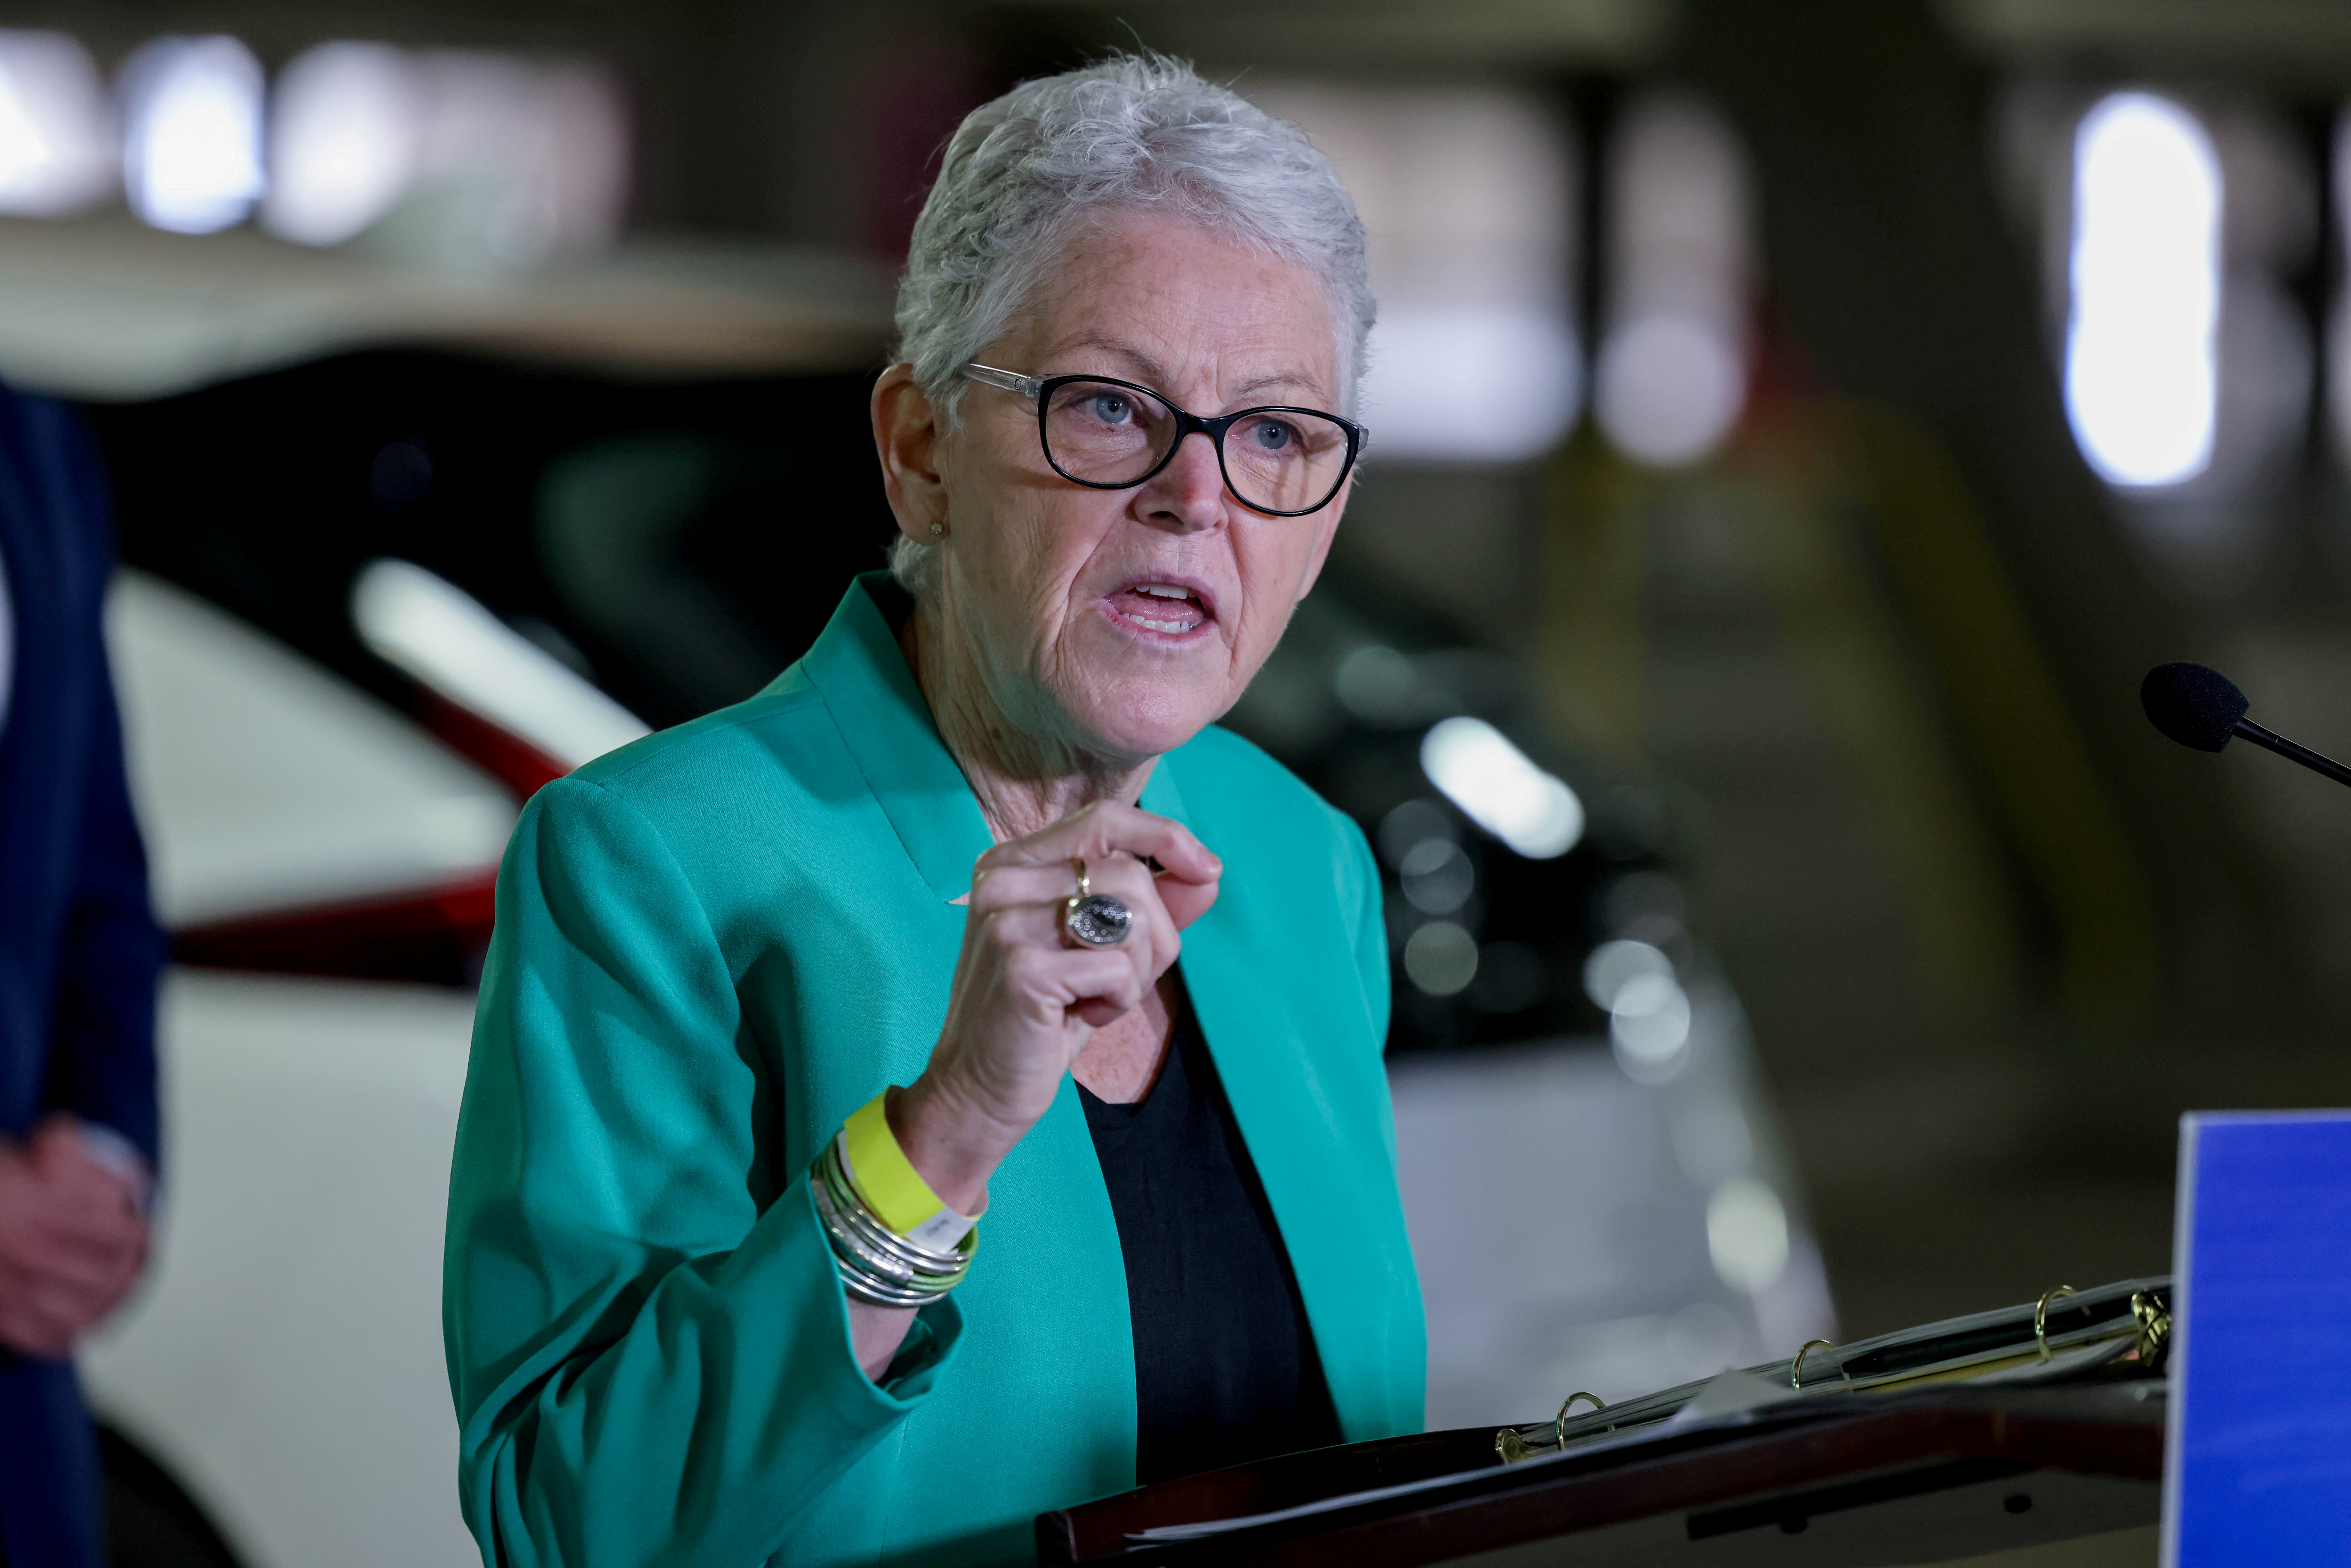 White House Climate Advisor Gina McCarthy holds a news conference in the parking garage at Union Station in front of new EV charging stations in Washington, U.S., April 22, 2021. REUTERS/Evelyn Hockstein//File Photo